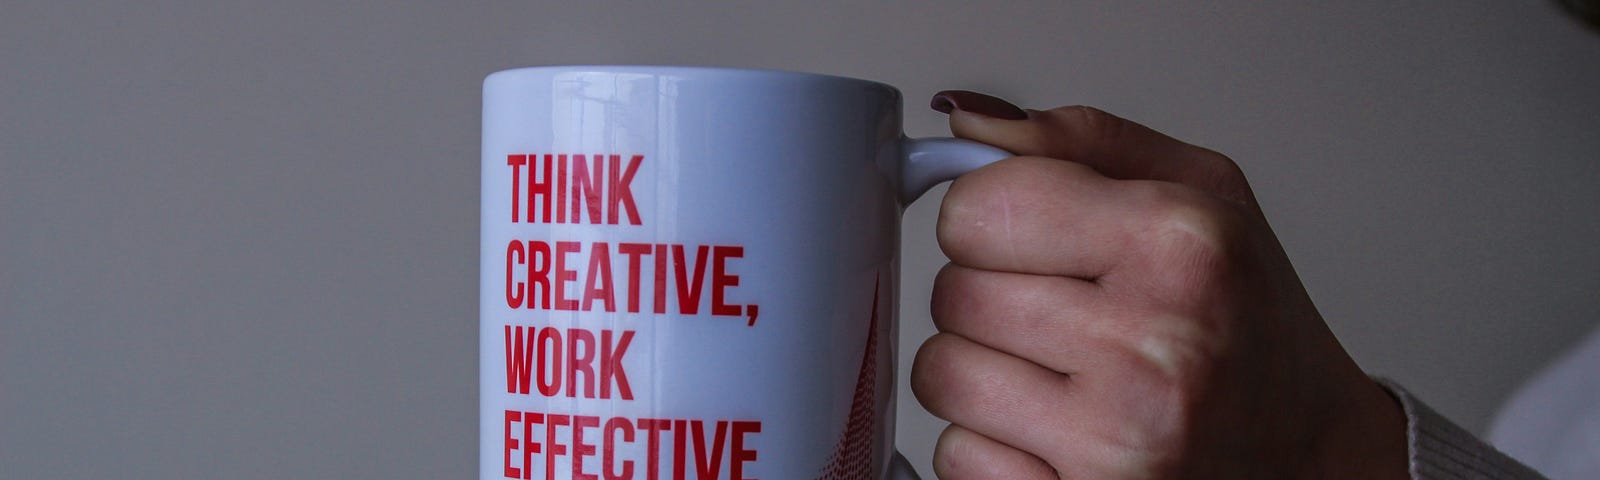 A woman’s hand holding a mug with the message “think creative, work effective”